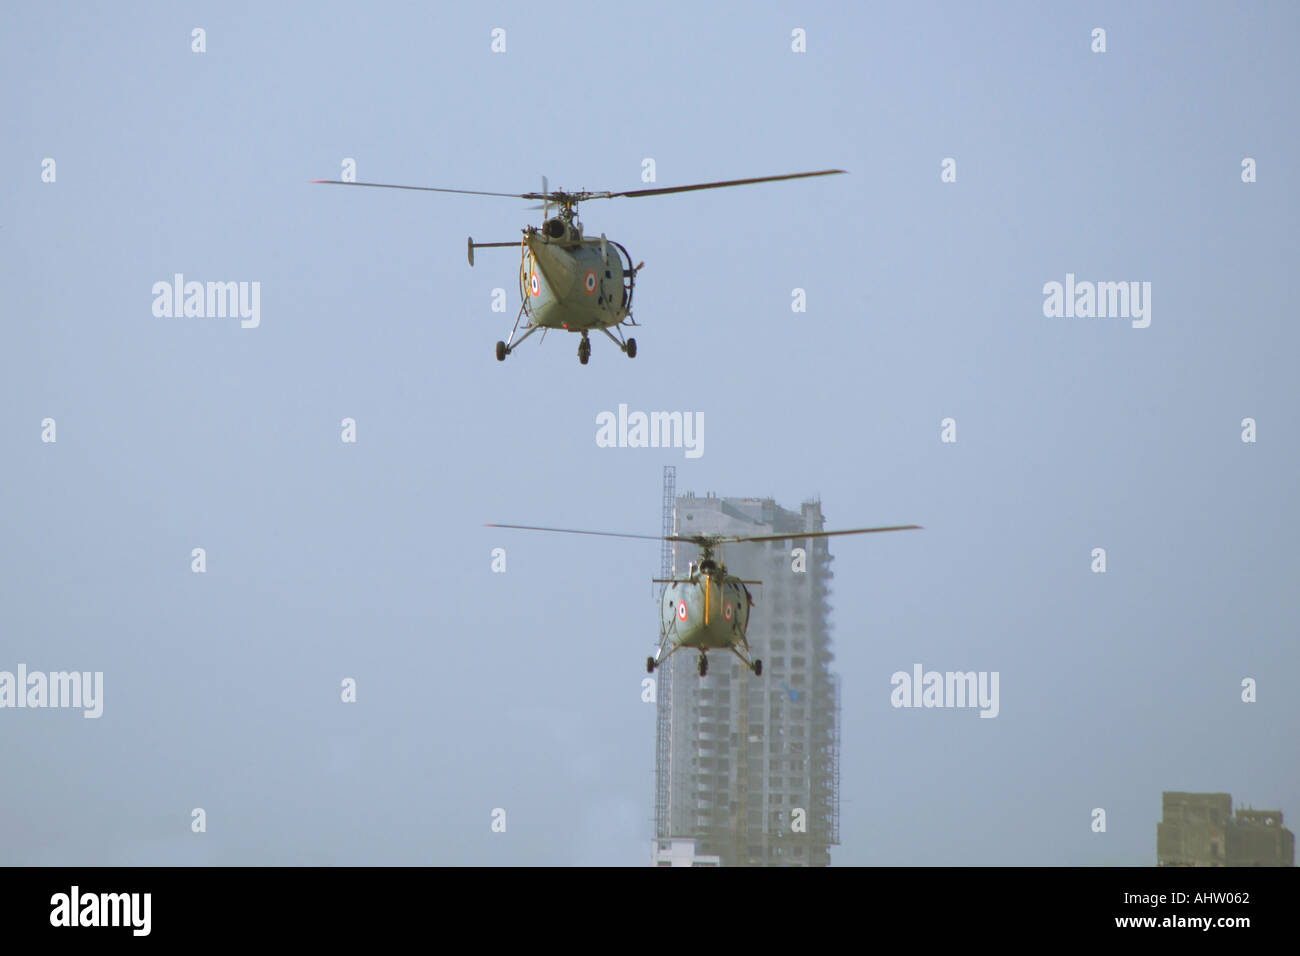 AAD 91763 Two helicopters peforming in sky during air show at Bombay now Mumbai Maharashtra India Stock Photo